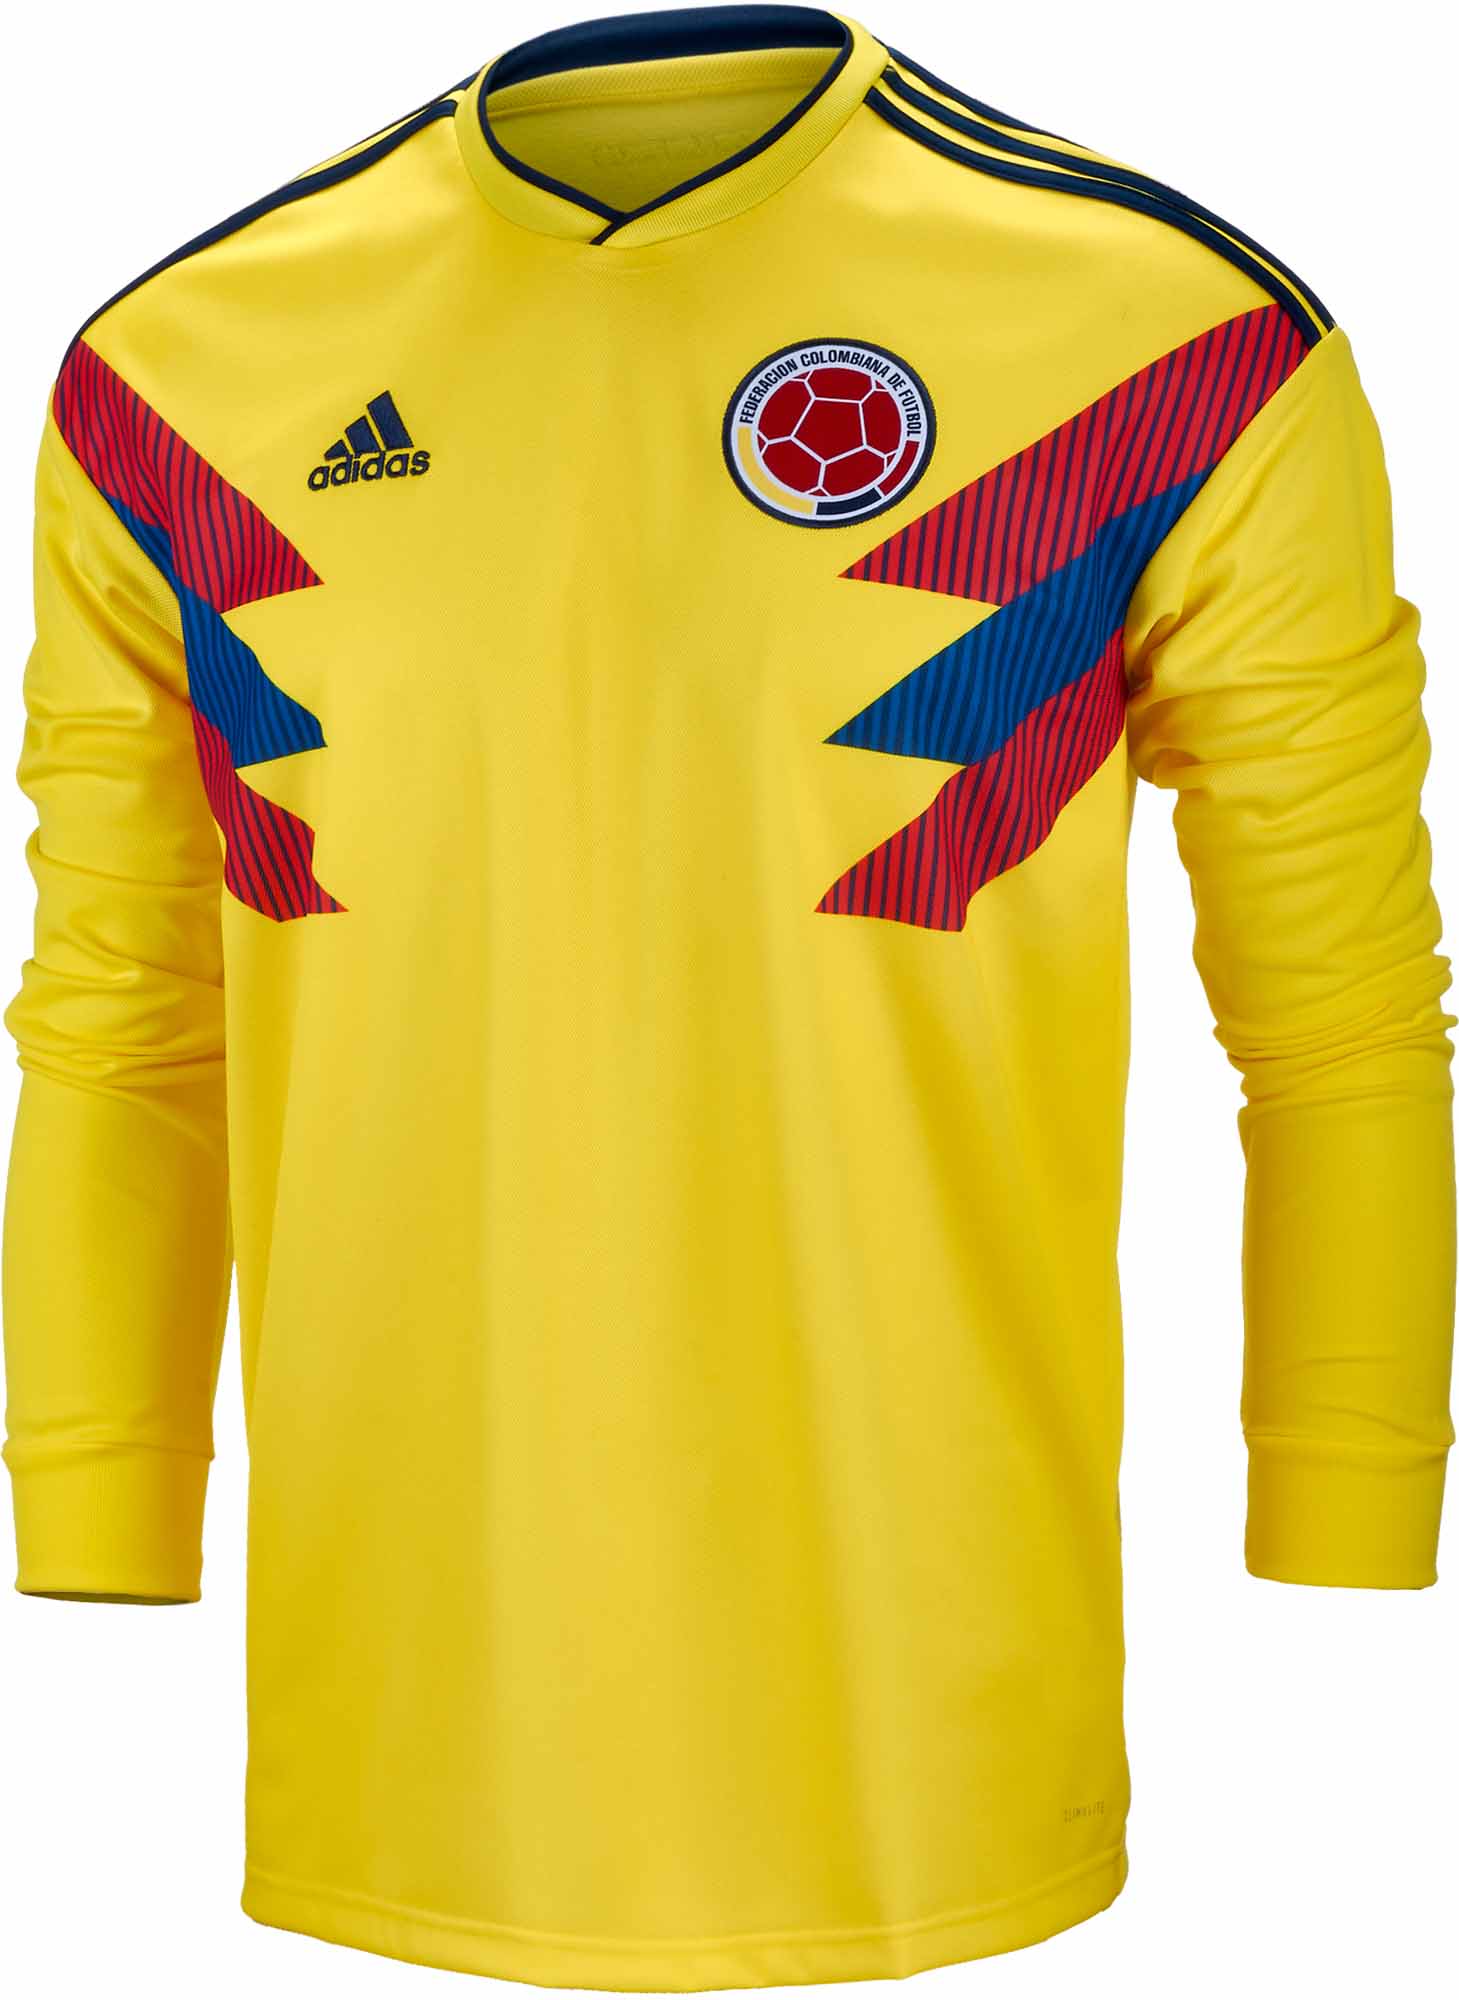 colombia soccer shirt